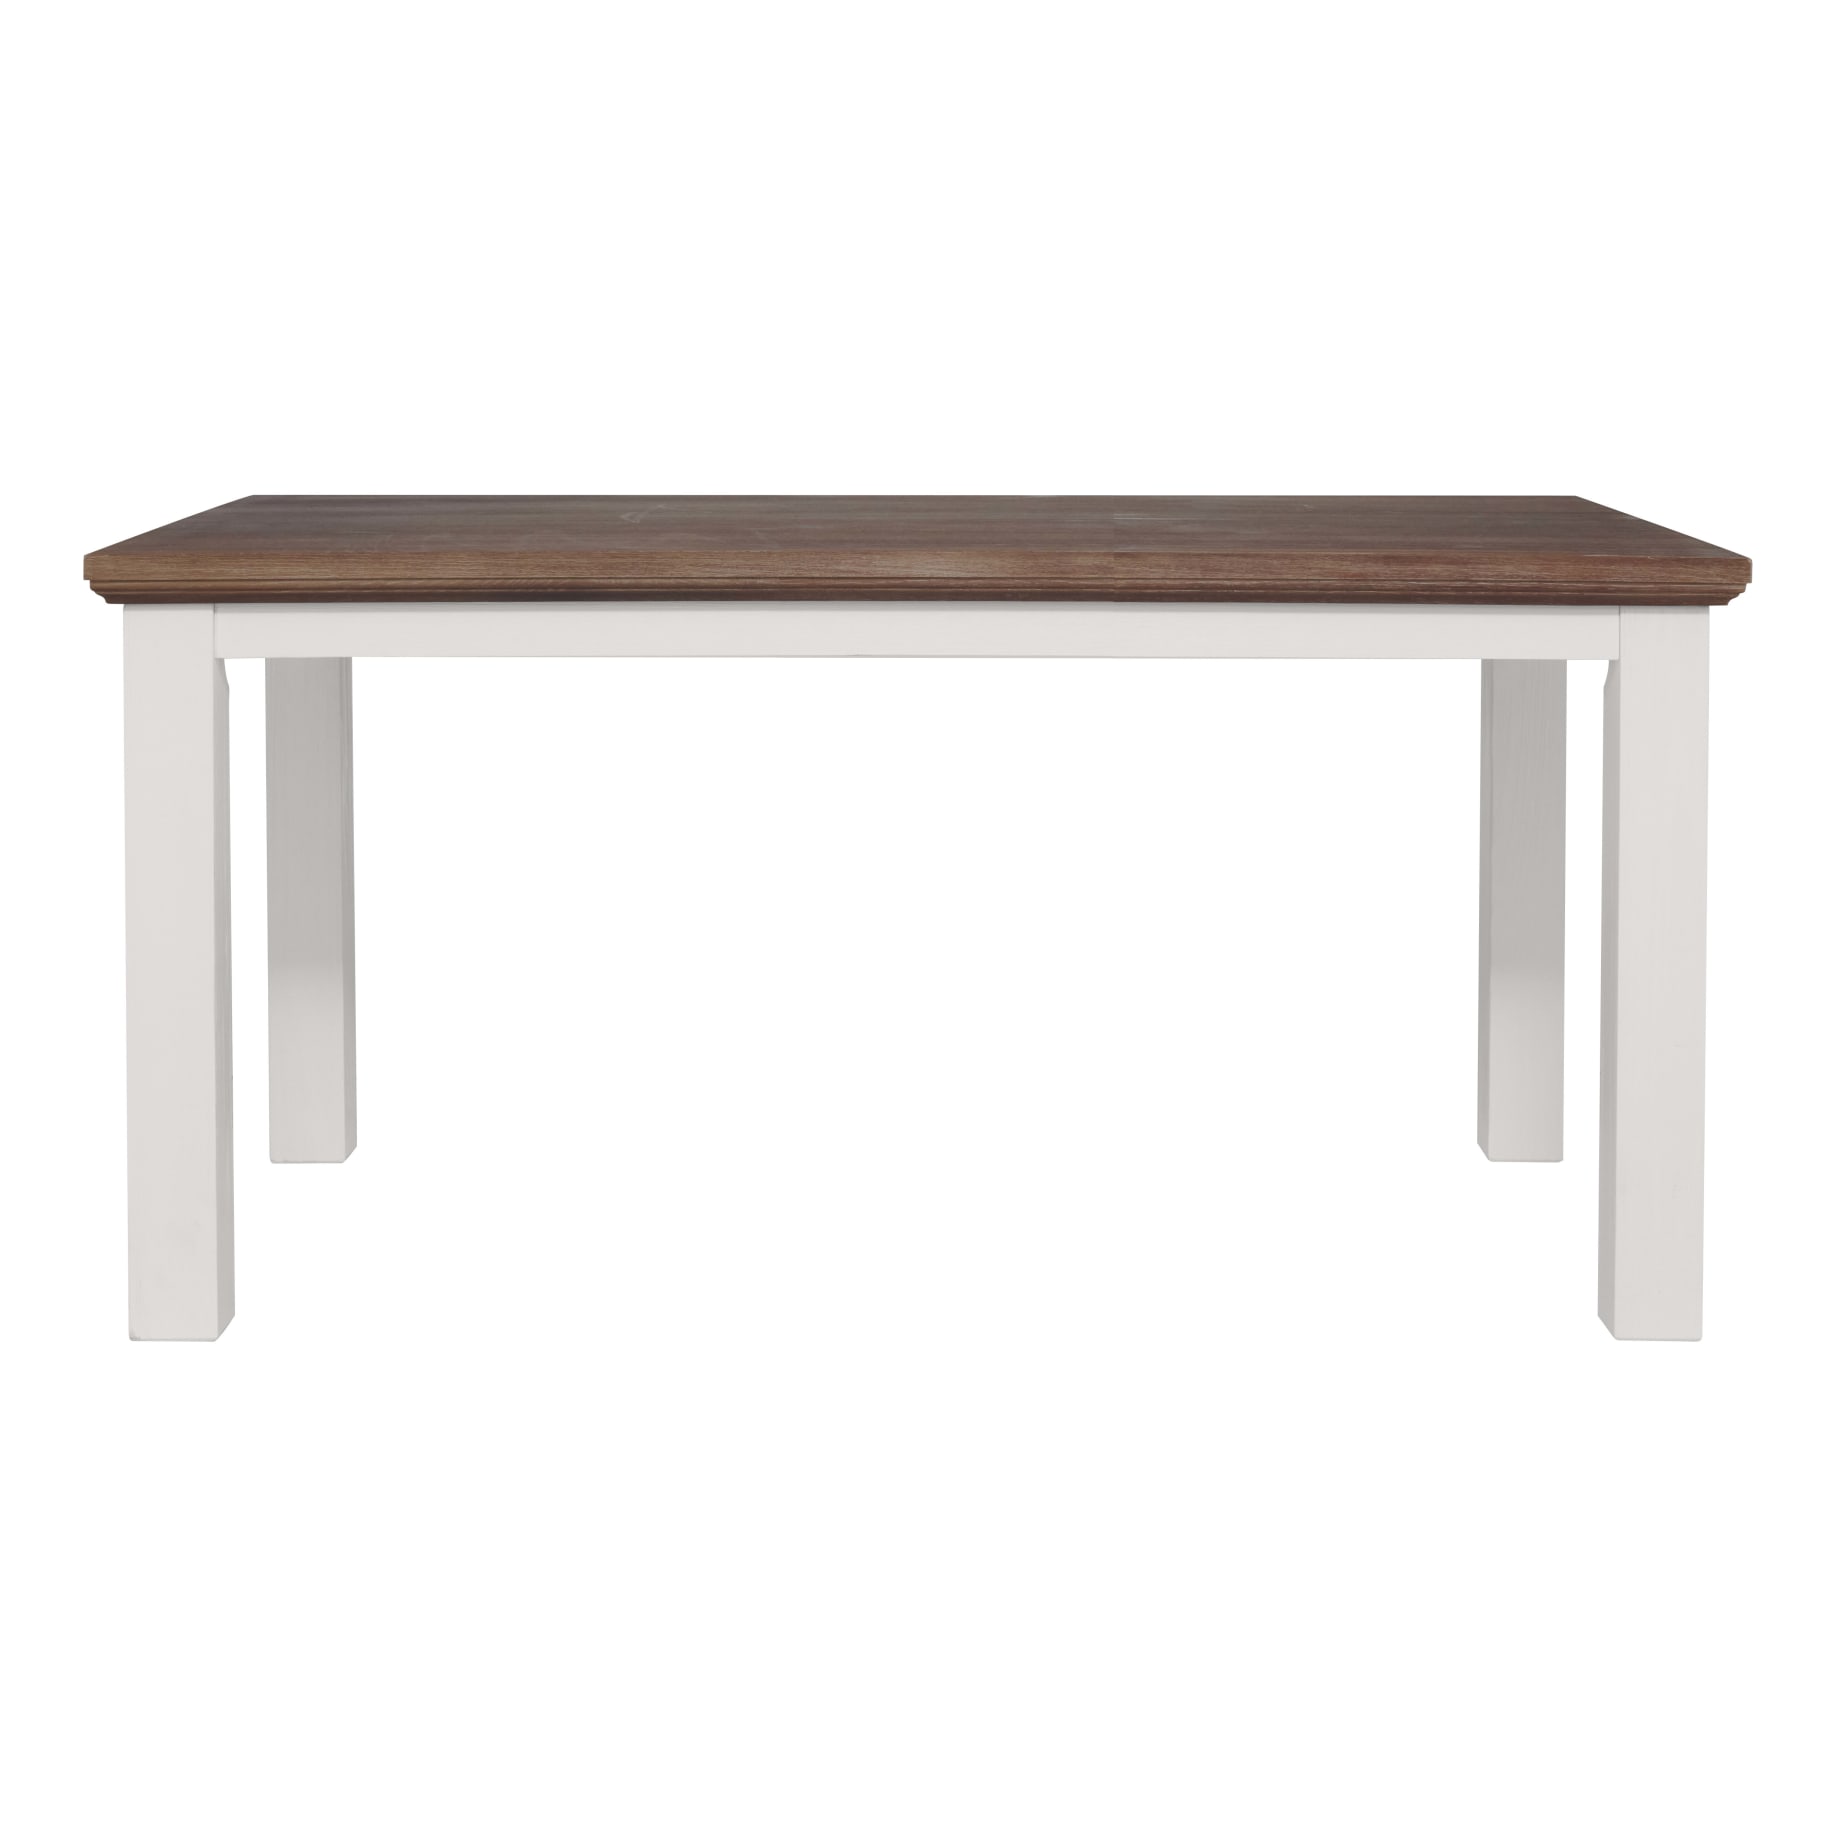 Hamptons Dining Table 160cm in Acacia Two Tone